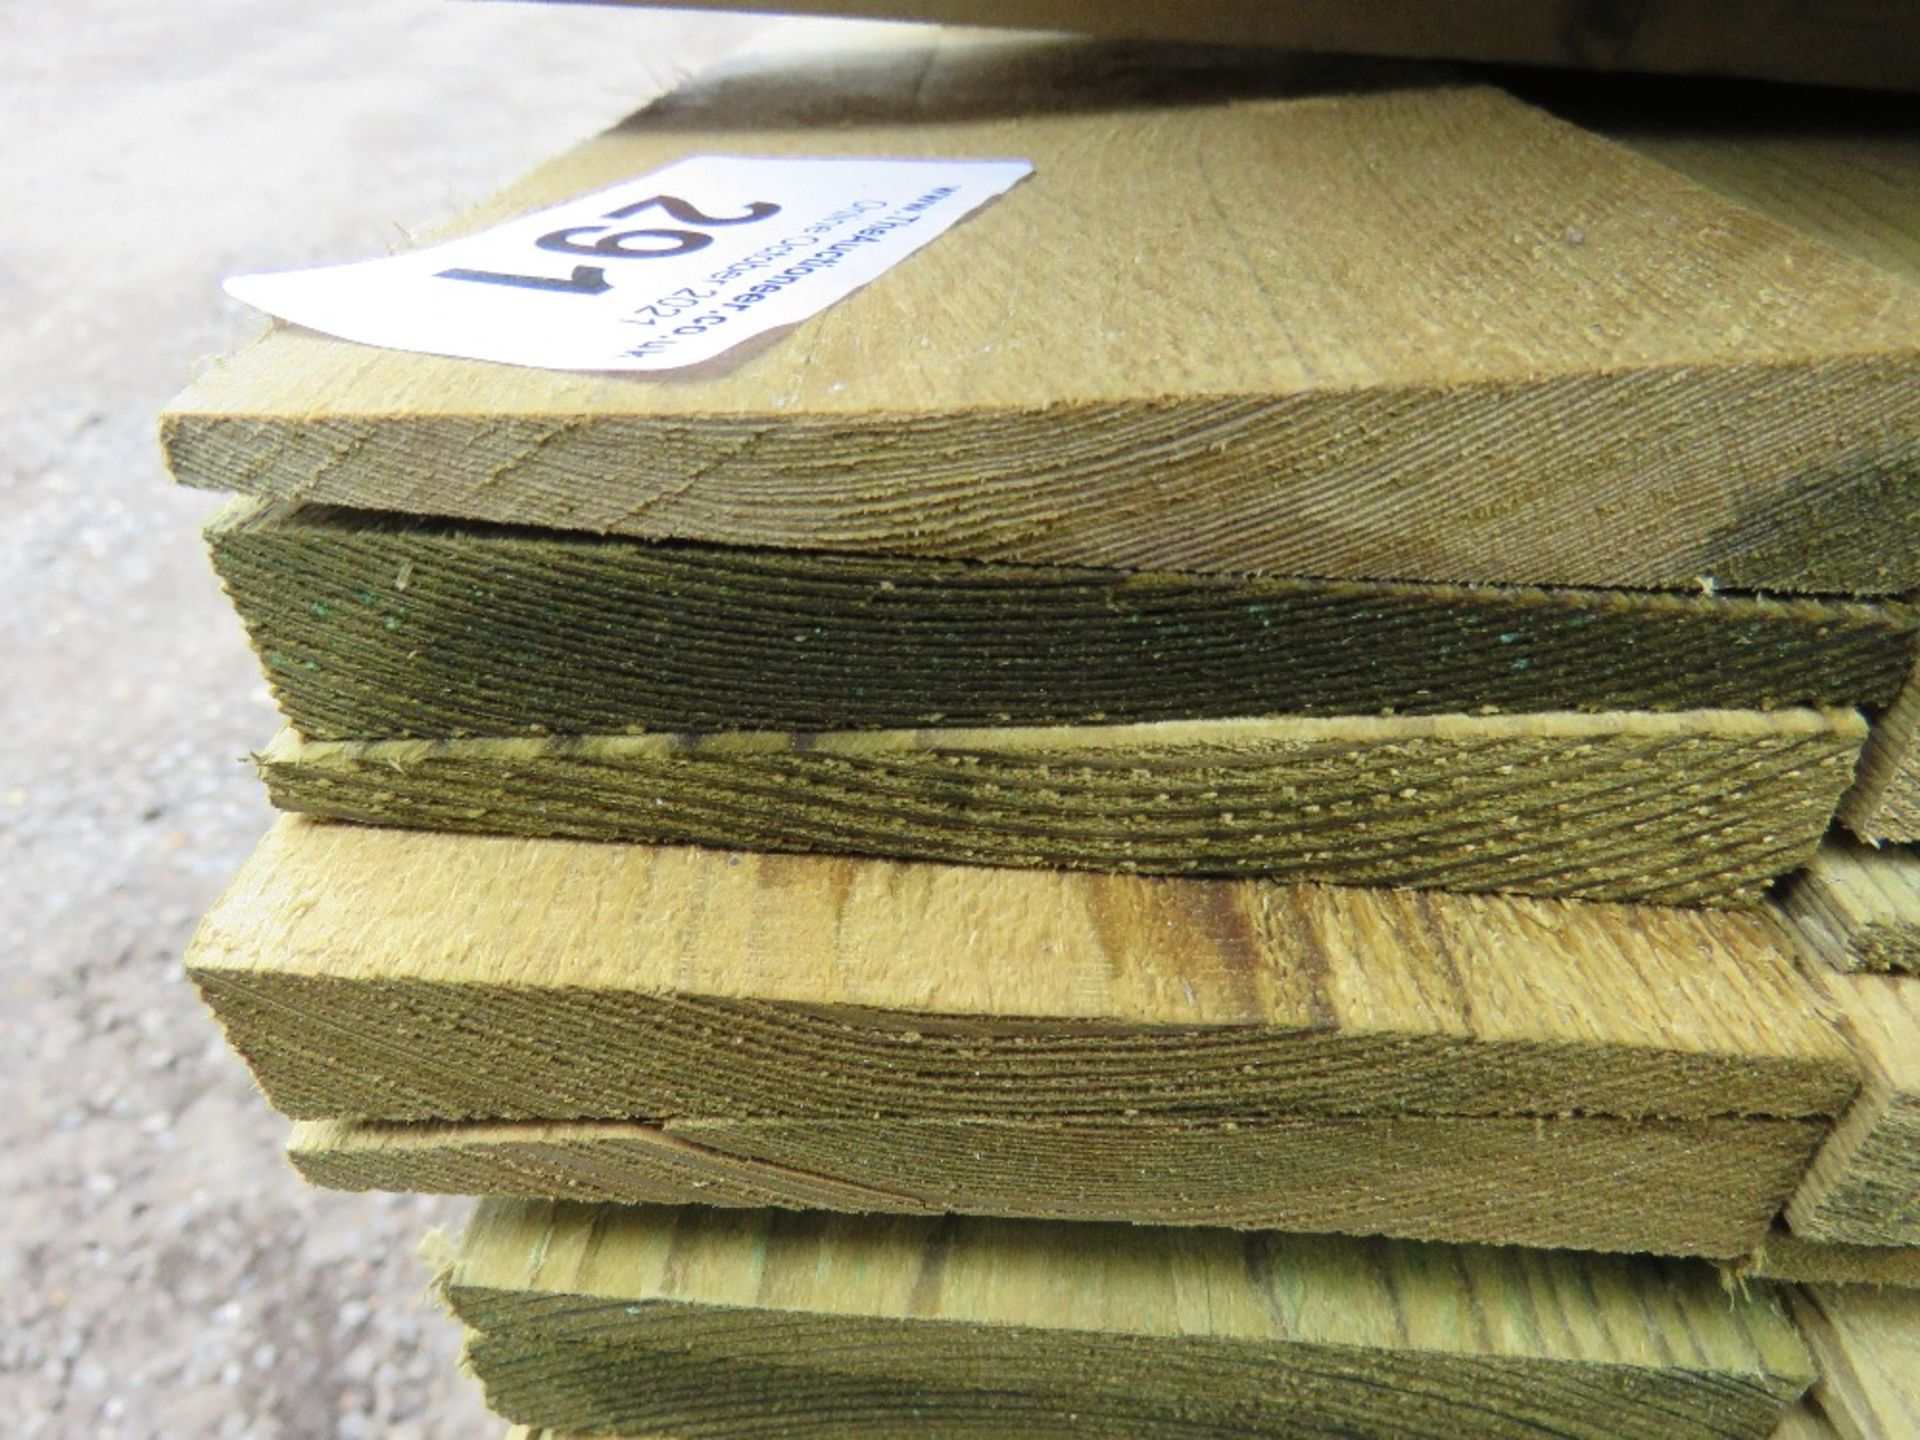 LARGE PACK OF TREATED FEATHER EDGE TIMBER CLADDING BOARDS, 1.2M LENGTH X 10CM WIDTH APPROX. - Image 4 of 5